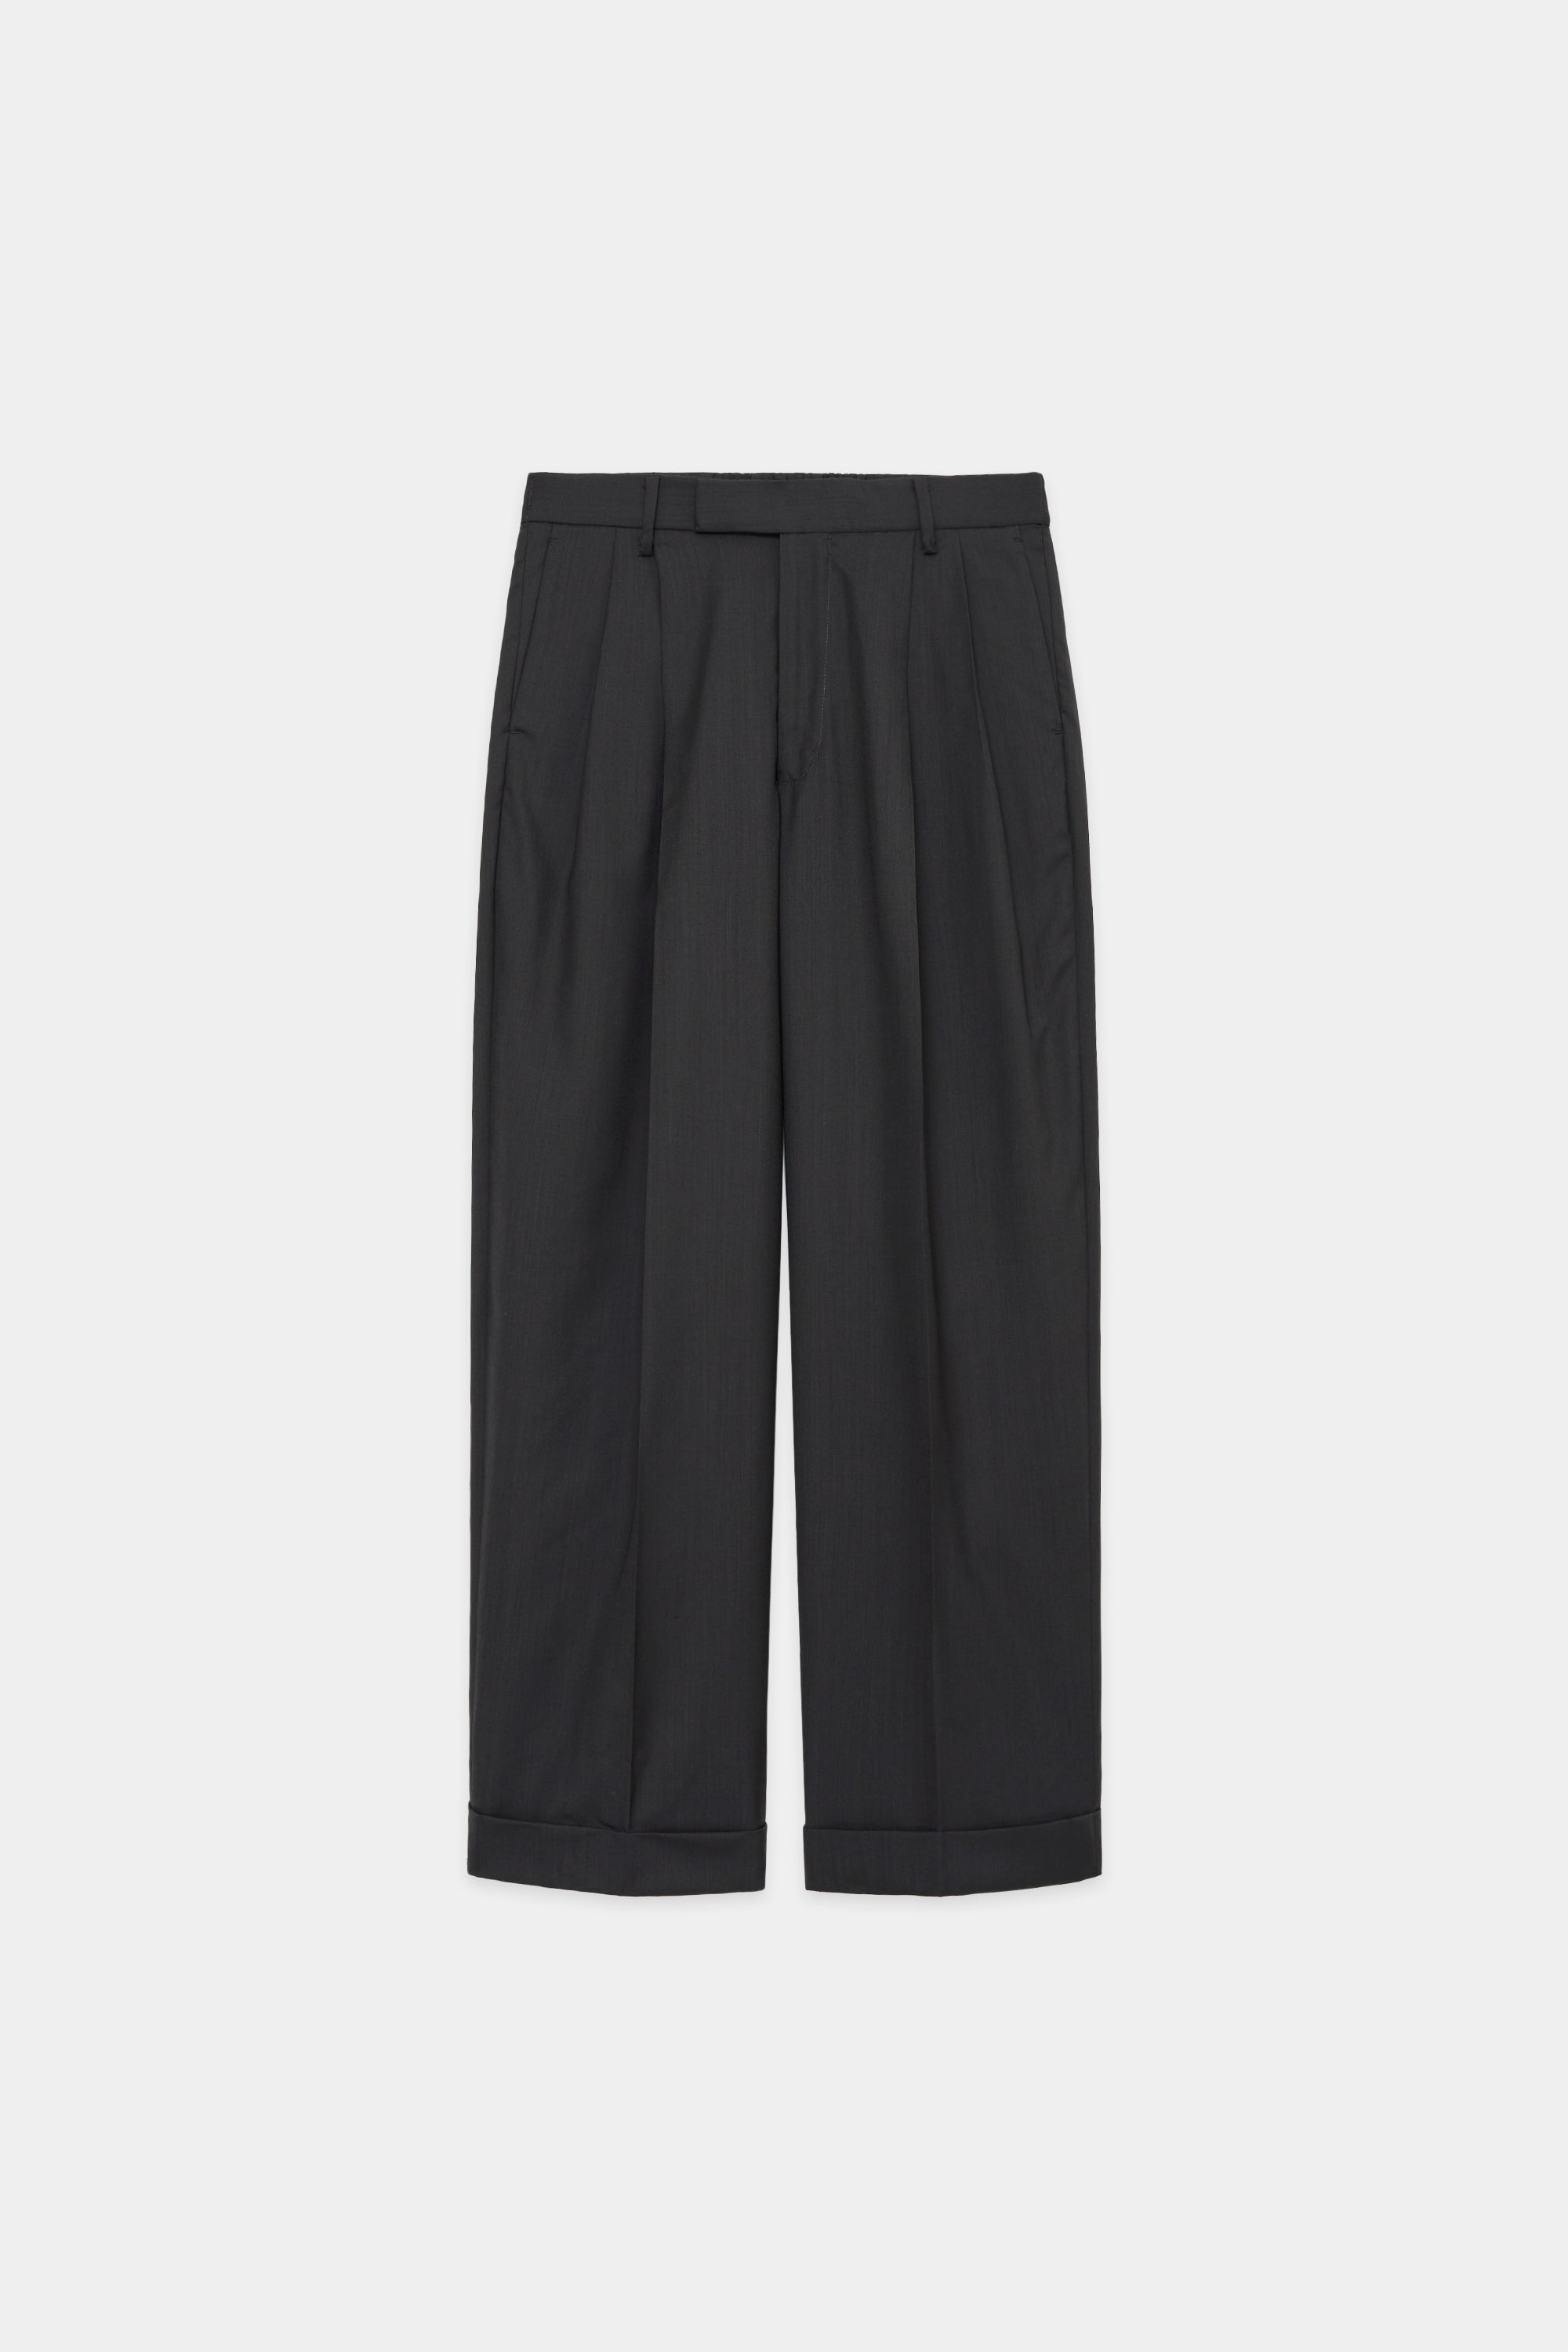 SUPER 120'S WOOL TROPICAL DOUBLE PLEATED CLASSIC WIDE TROUSERS, Charcoal